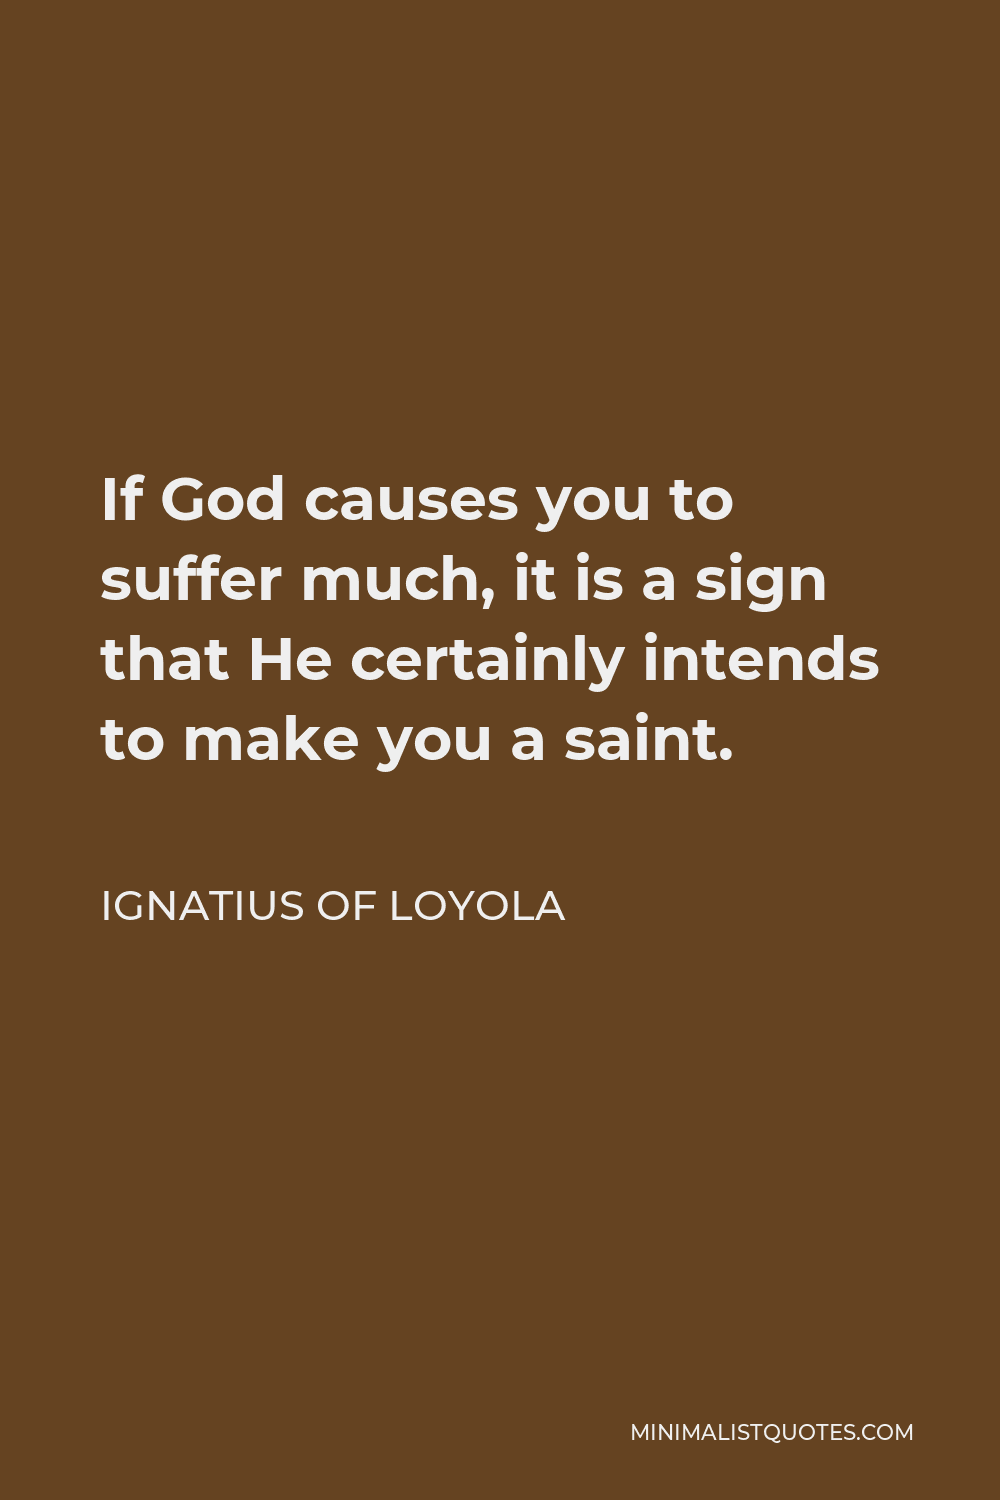 Ignatius of Loyola Quote - If God causes you to suffer much, it is a sign that He certainly intends to make you a saint.